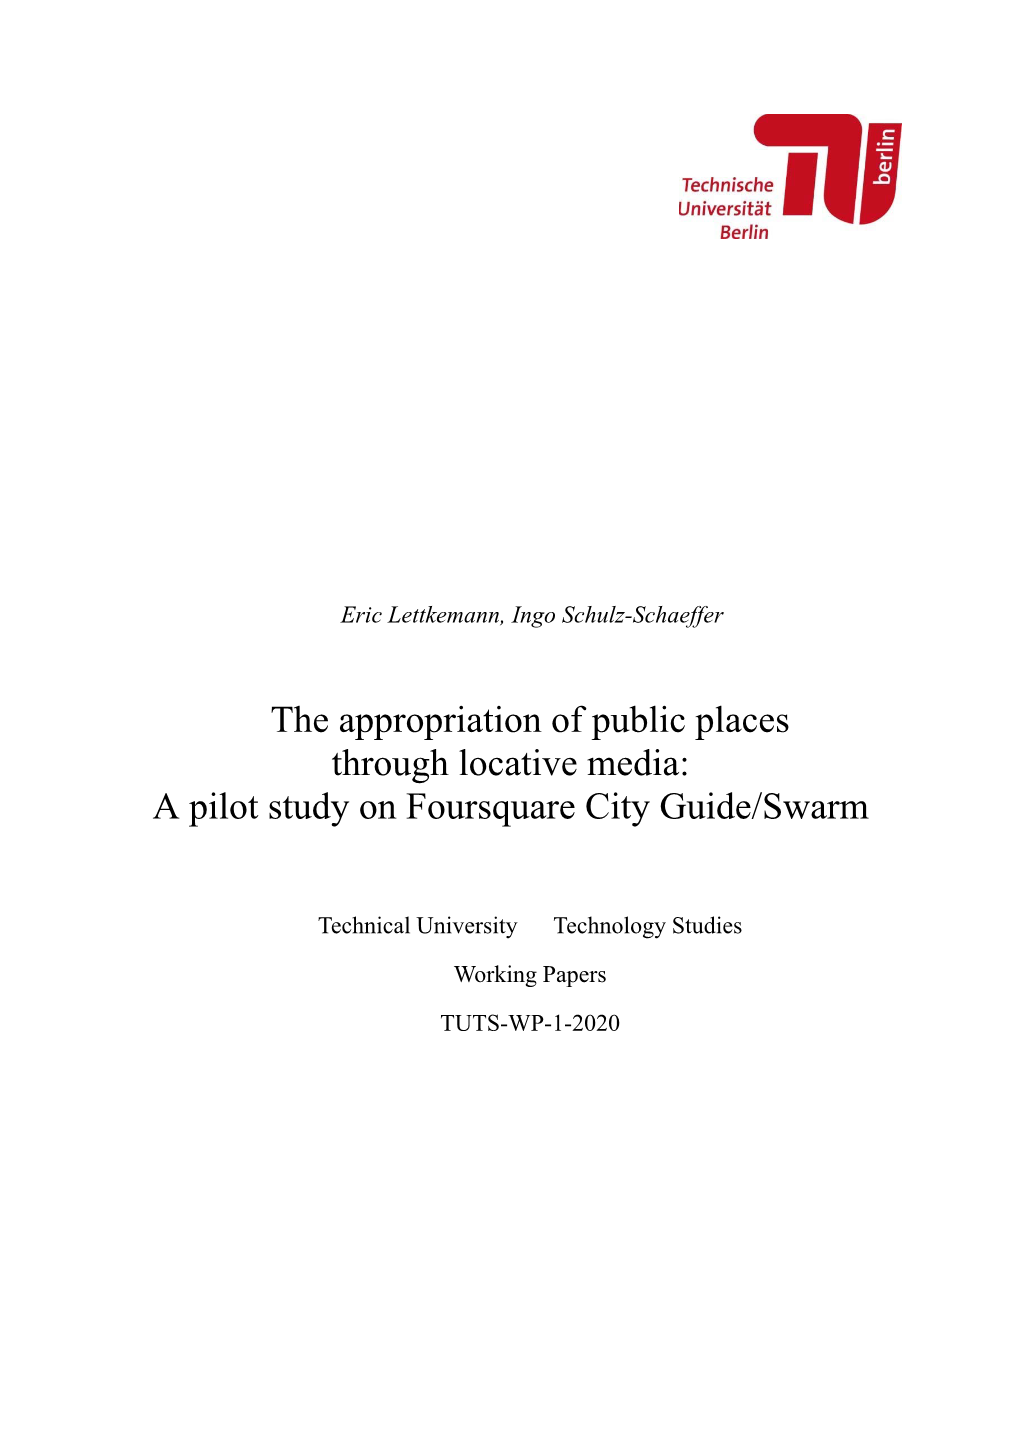 The Appropriation of Public Places Through Locative Media: a Pilot Study on Foursquare City Guide/Swarm